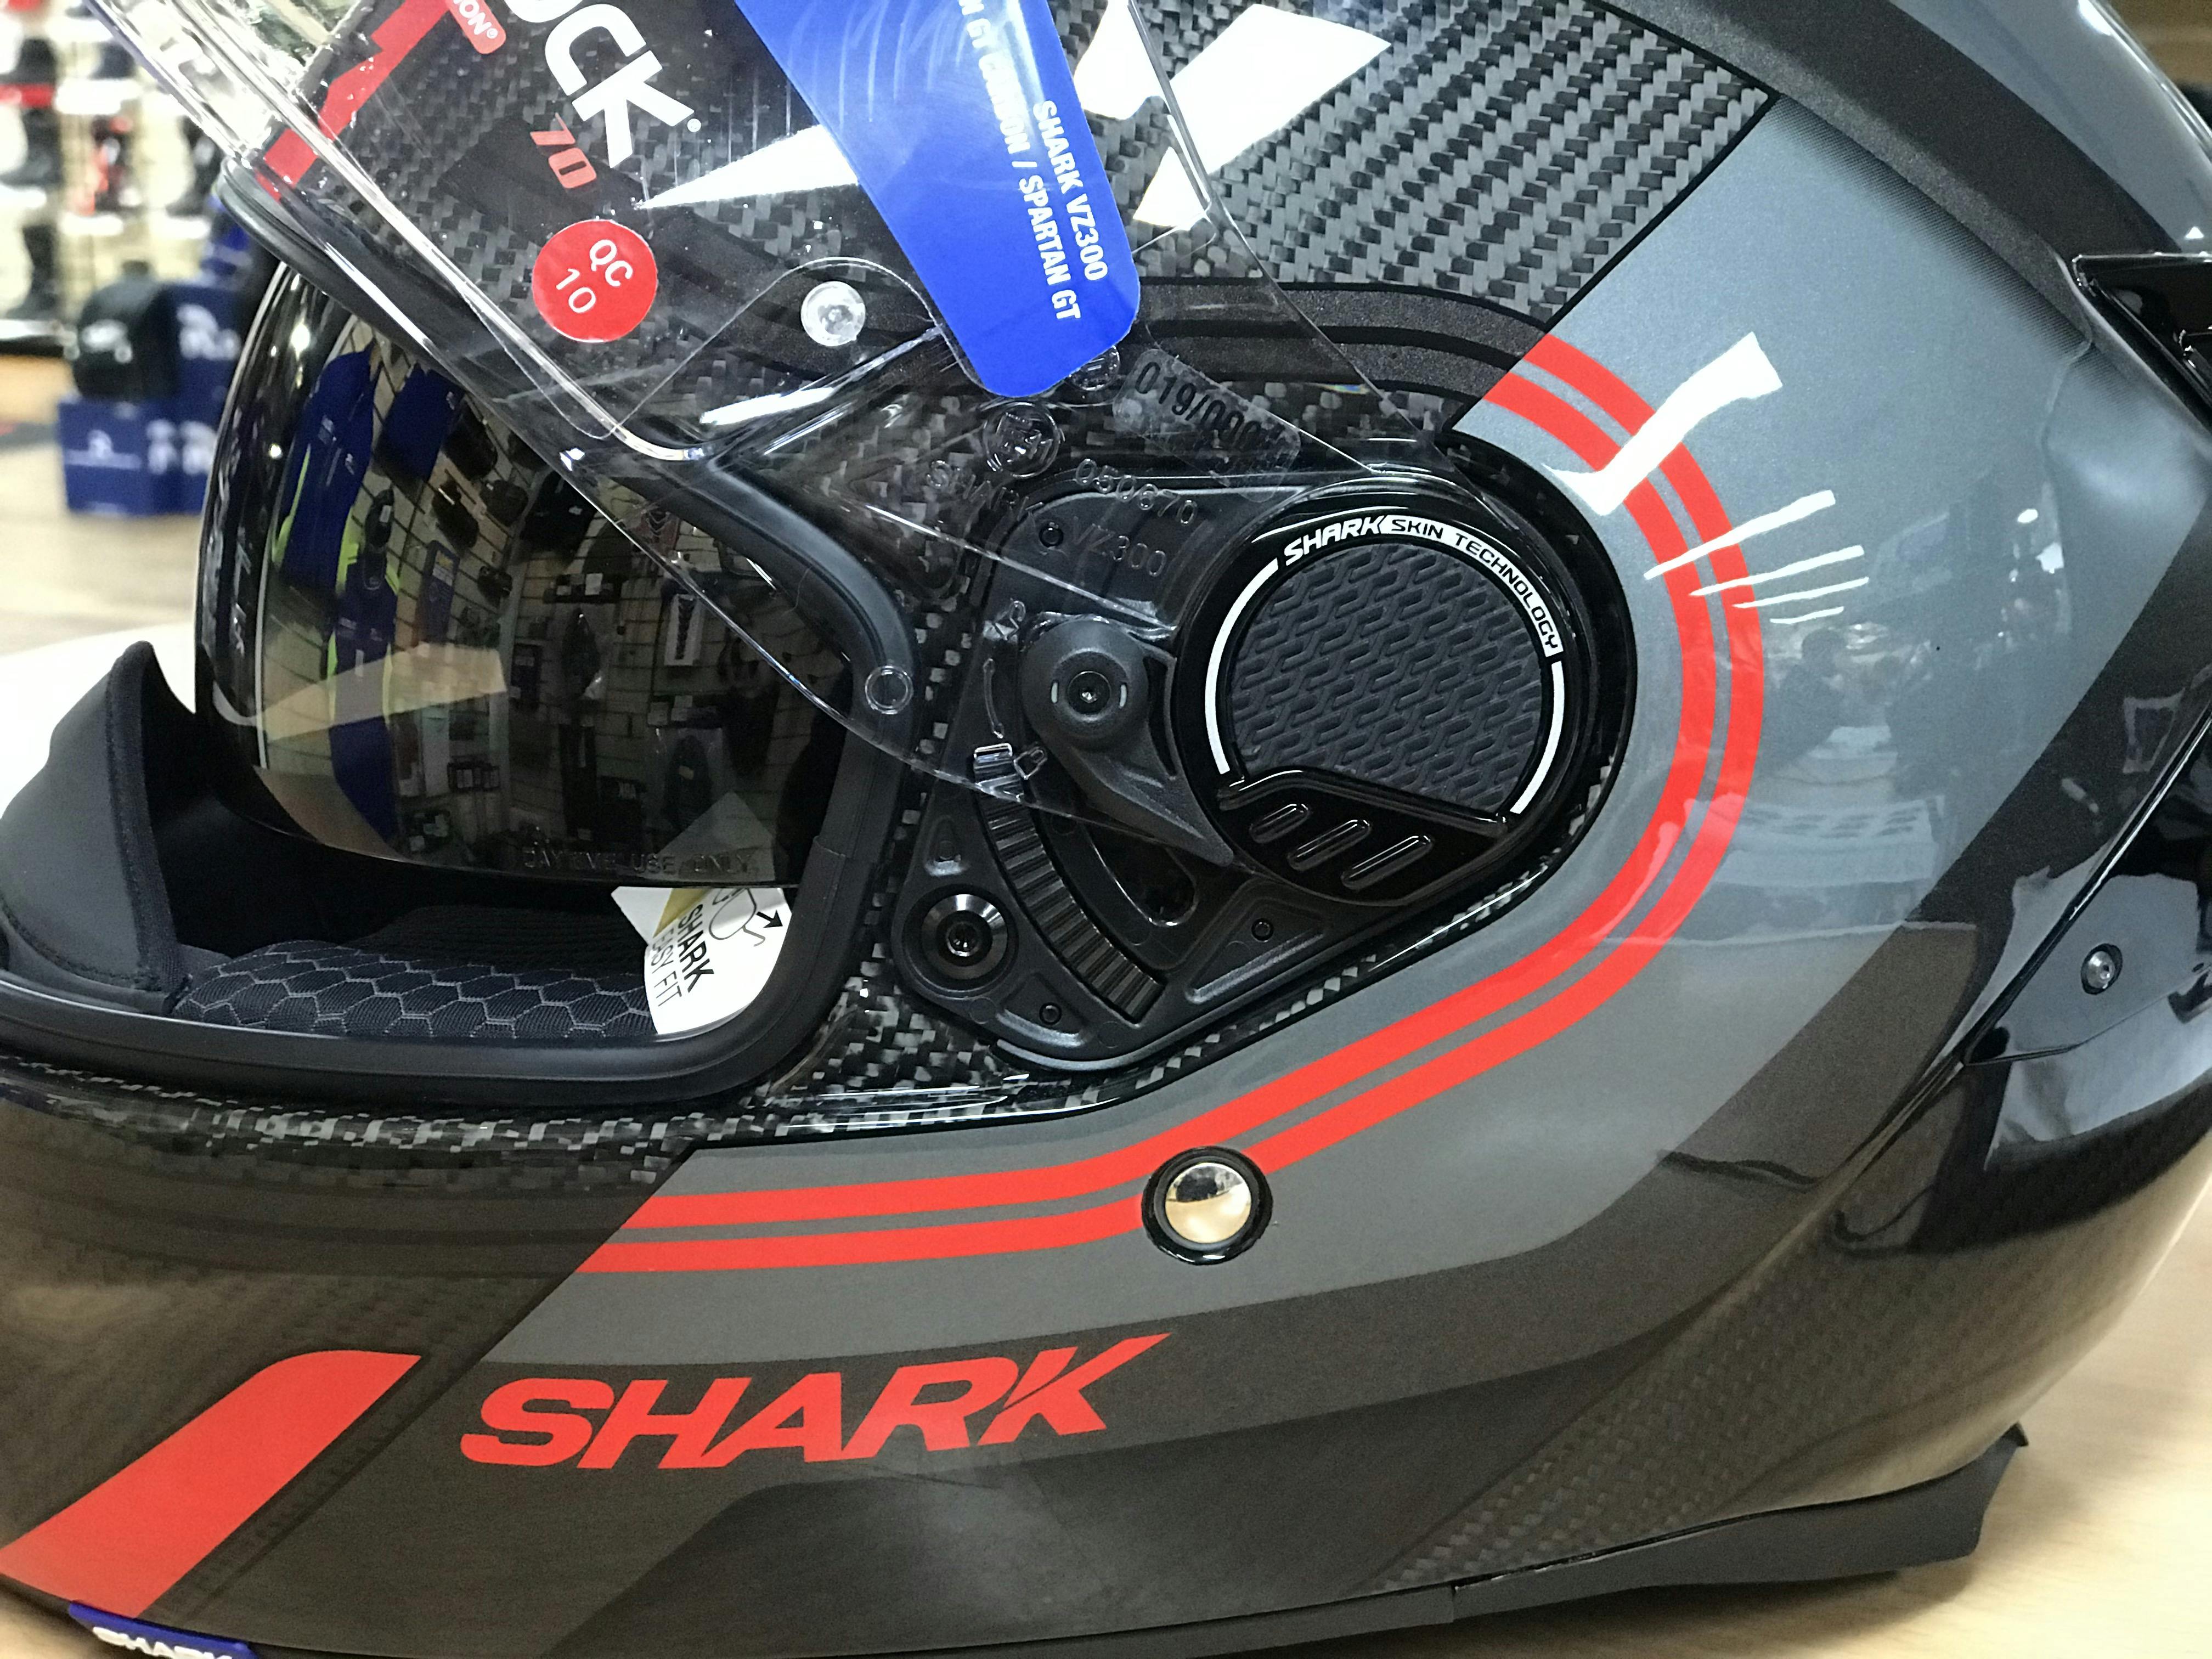 New visor with micro ratchet system for smooth visor operation on the Shark Carbon Spartan GT